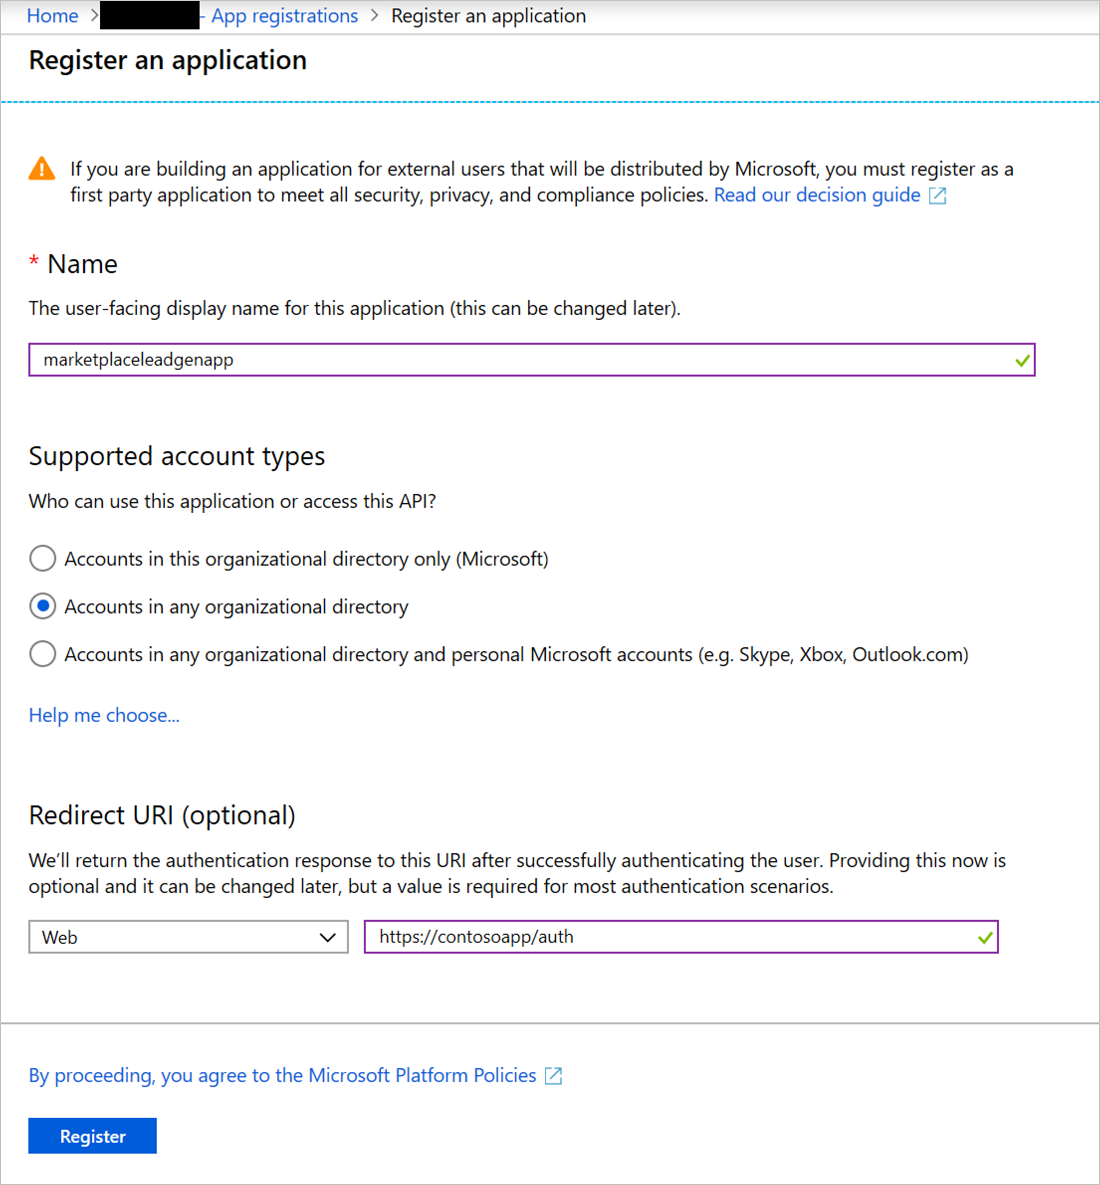 Screenshot illustrating the Register an application page.